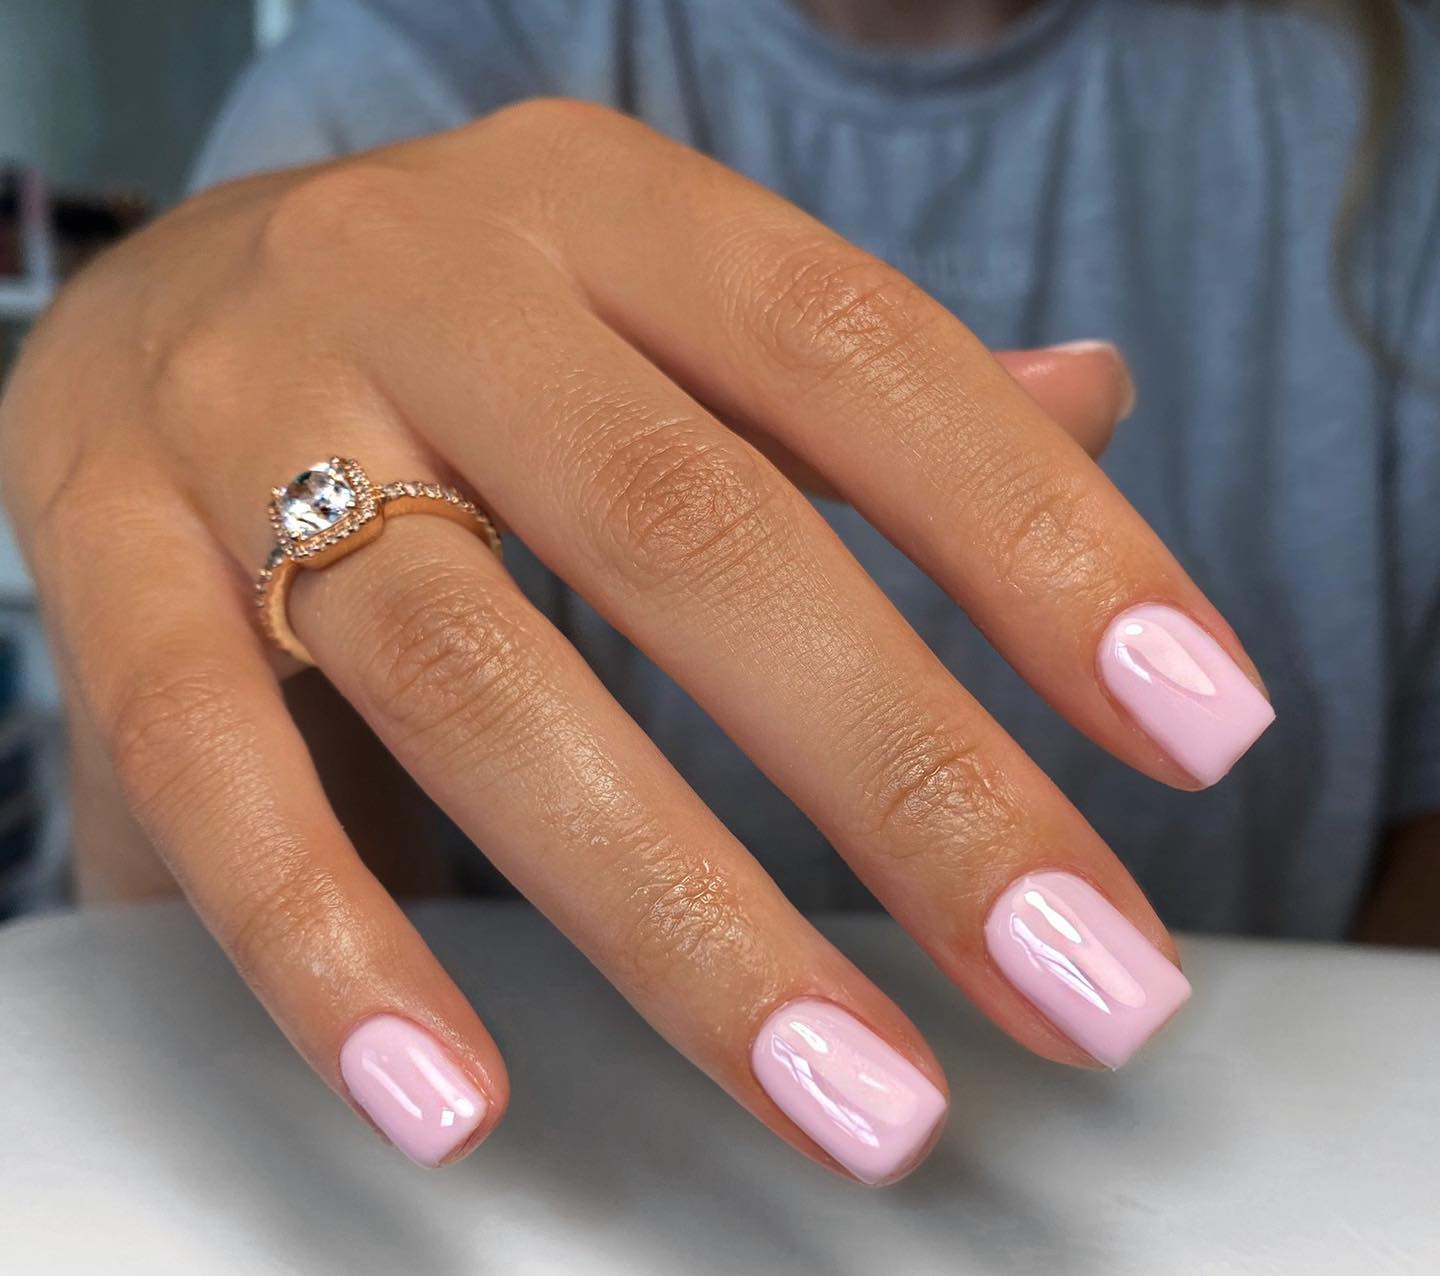 Subtle pink nails and this shape will look feminine and elegant!